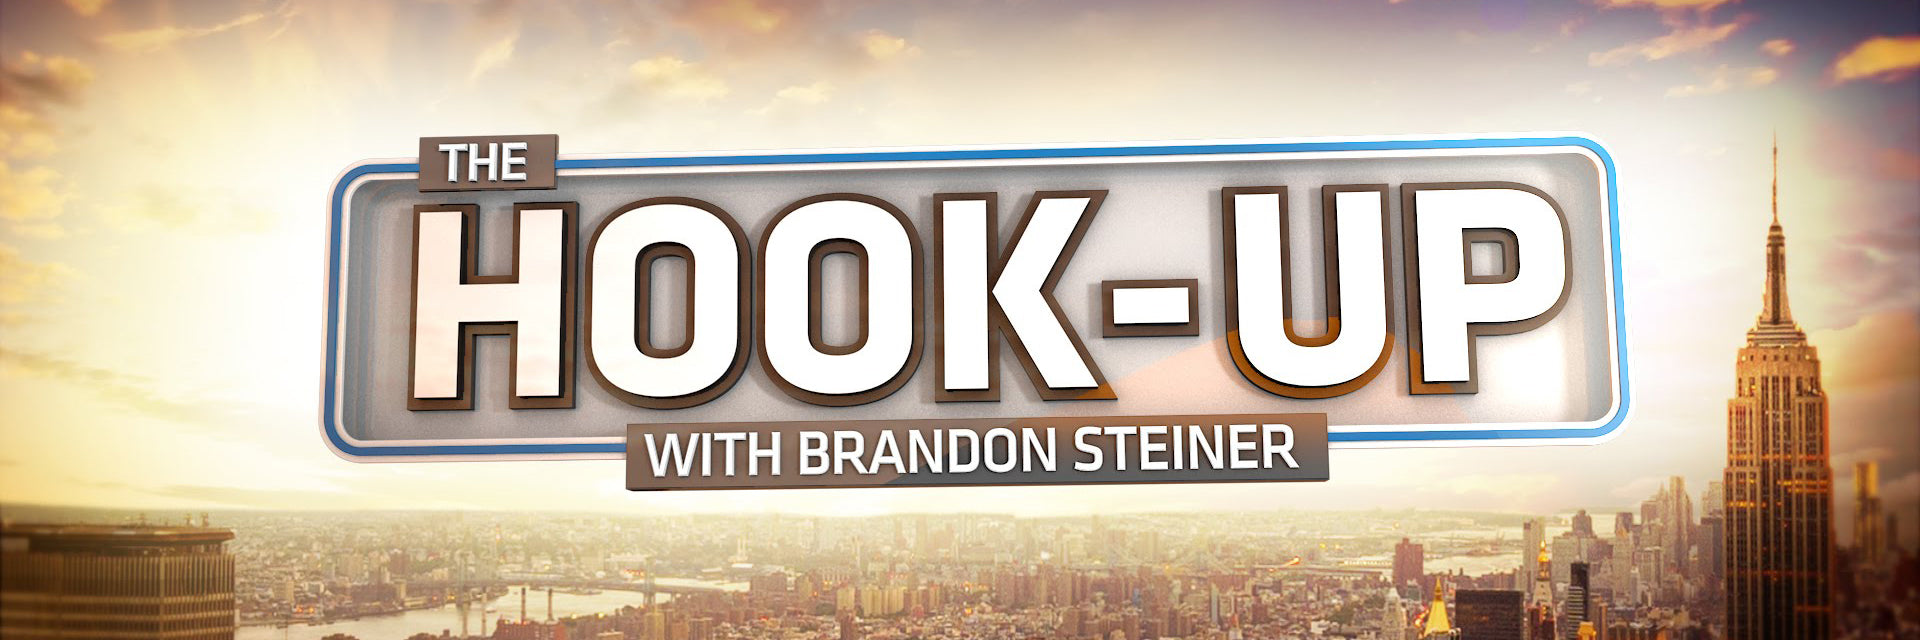 The Hook-Up with Brandon Steiner